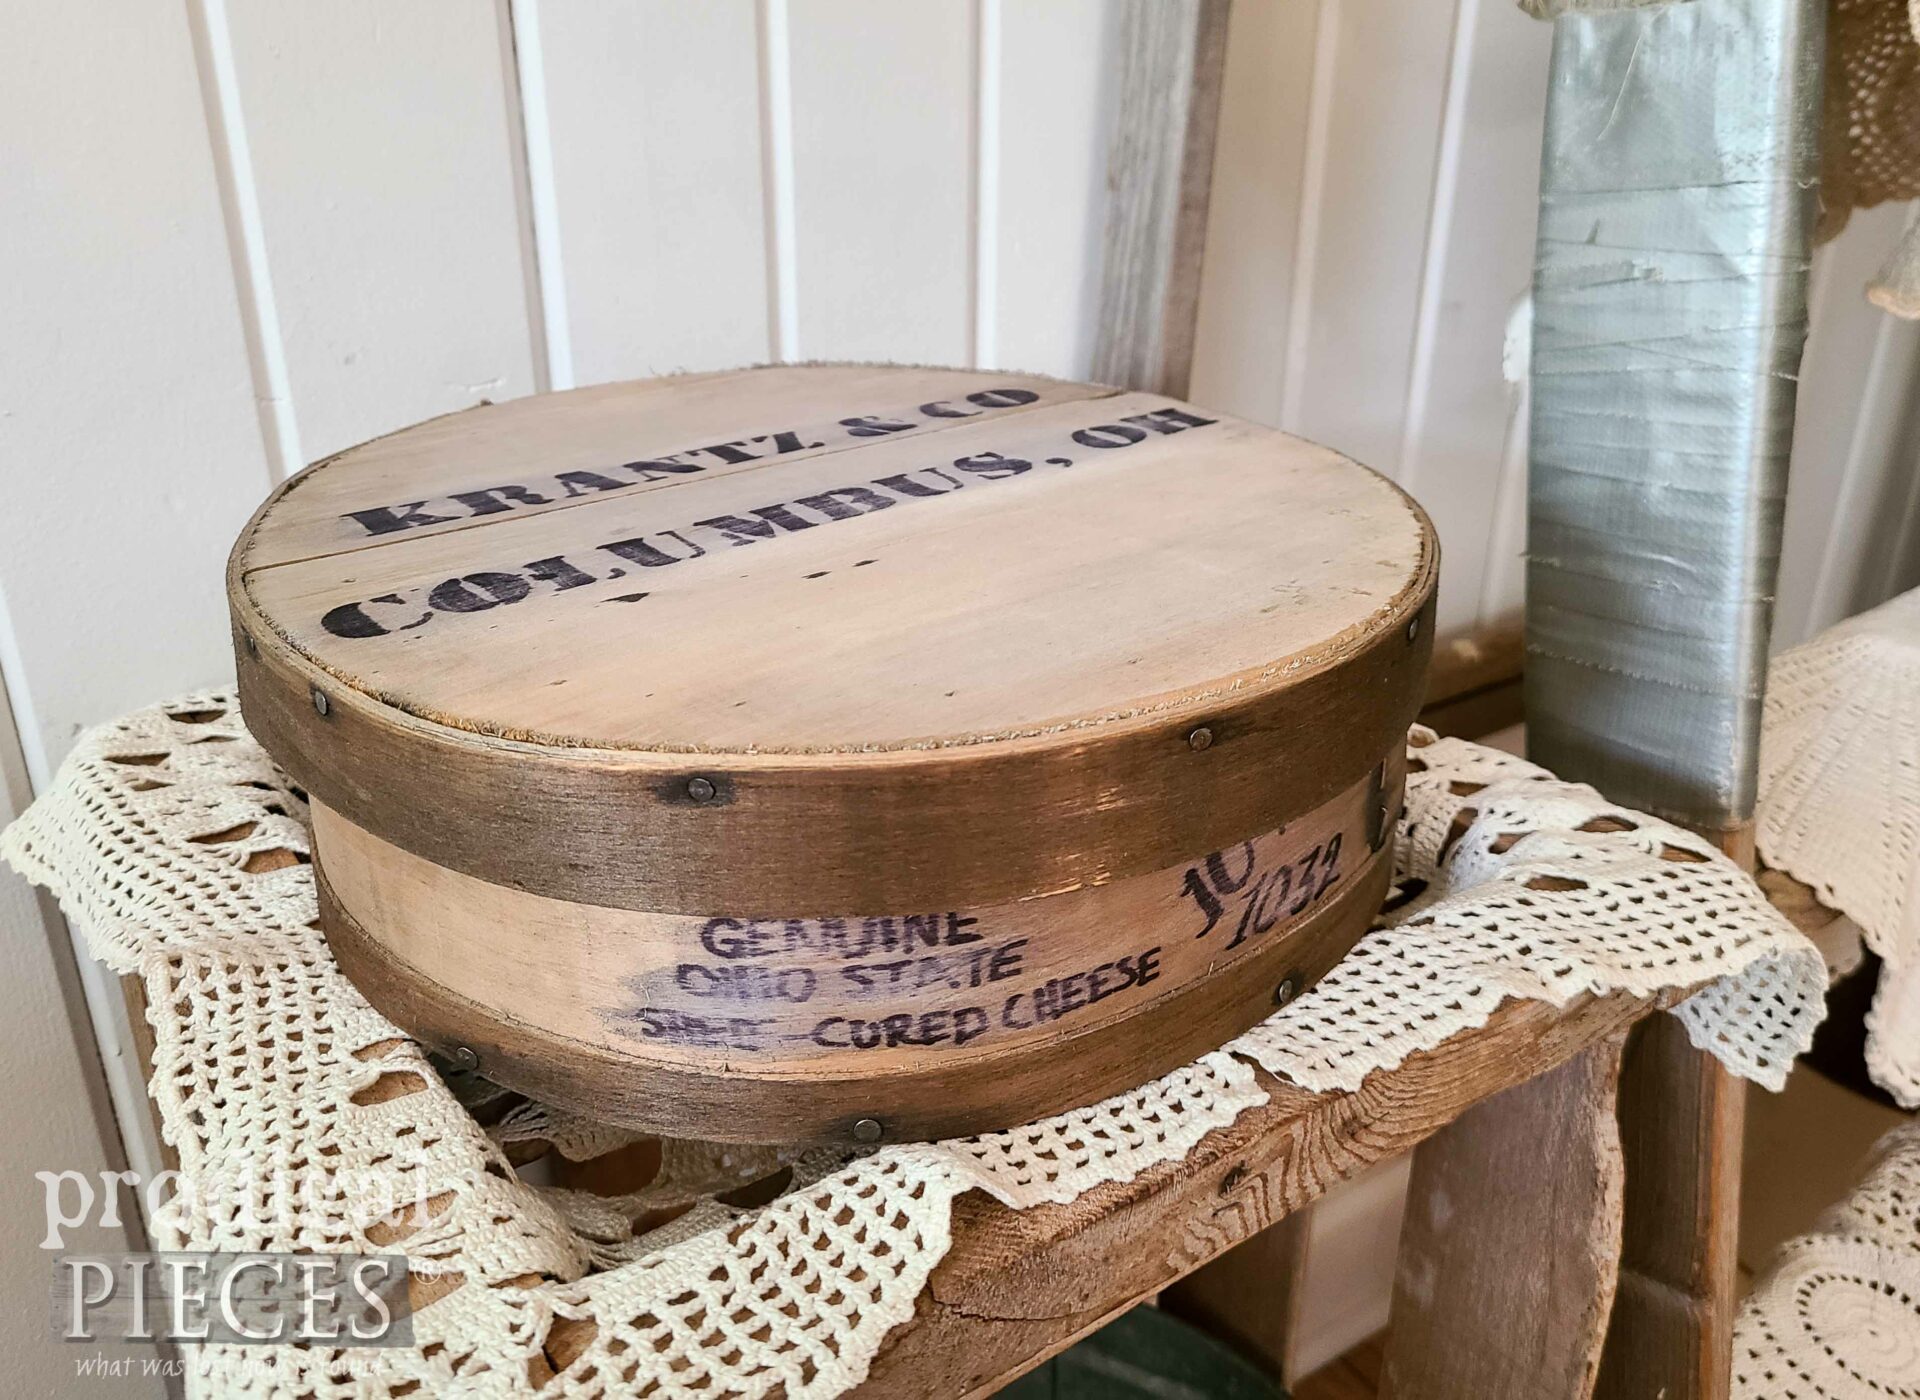 Rustic Farmhouse Cheese Box DIY Makeover by Larissa of Prodigal Pieces | prodigalpieces.com #prodigalpieces #farmhouse #diy